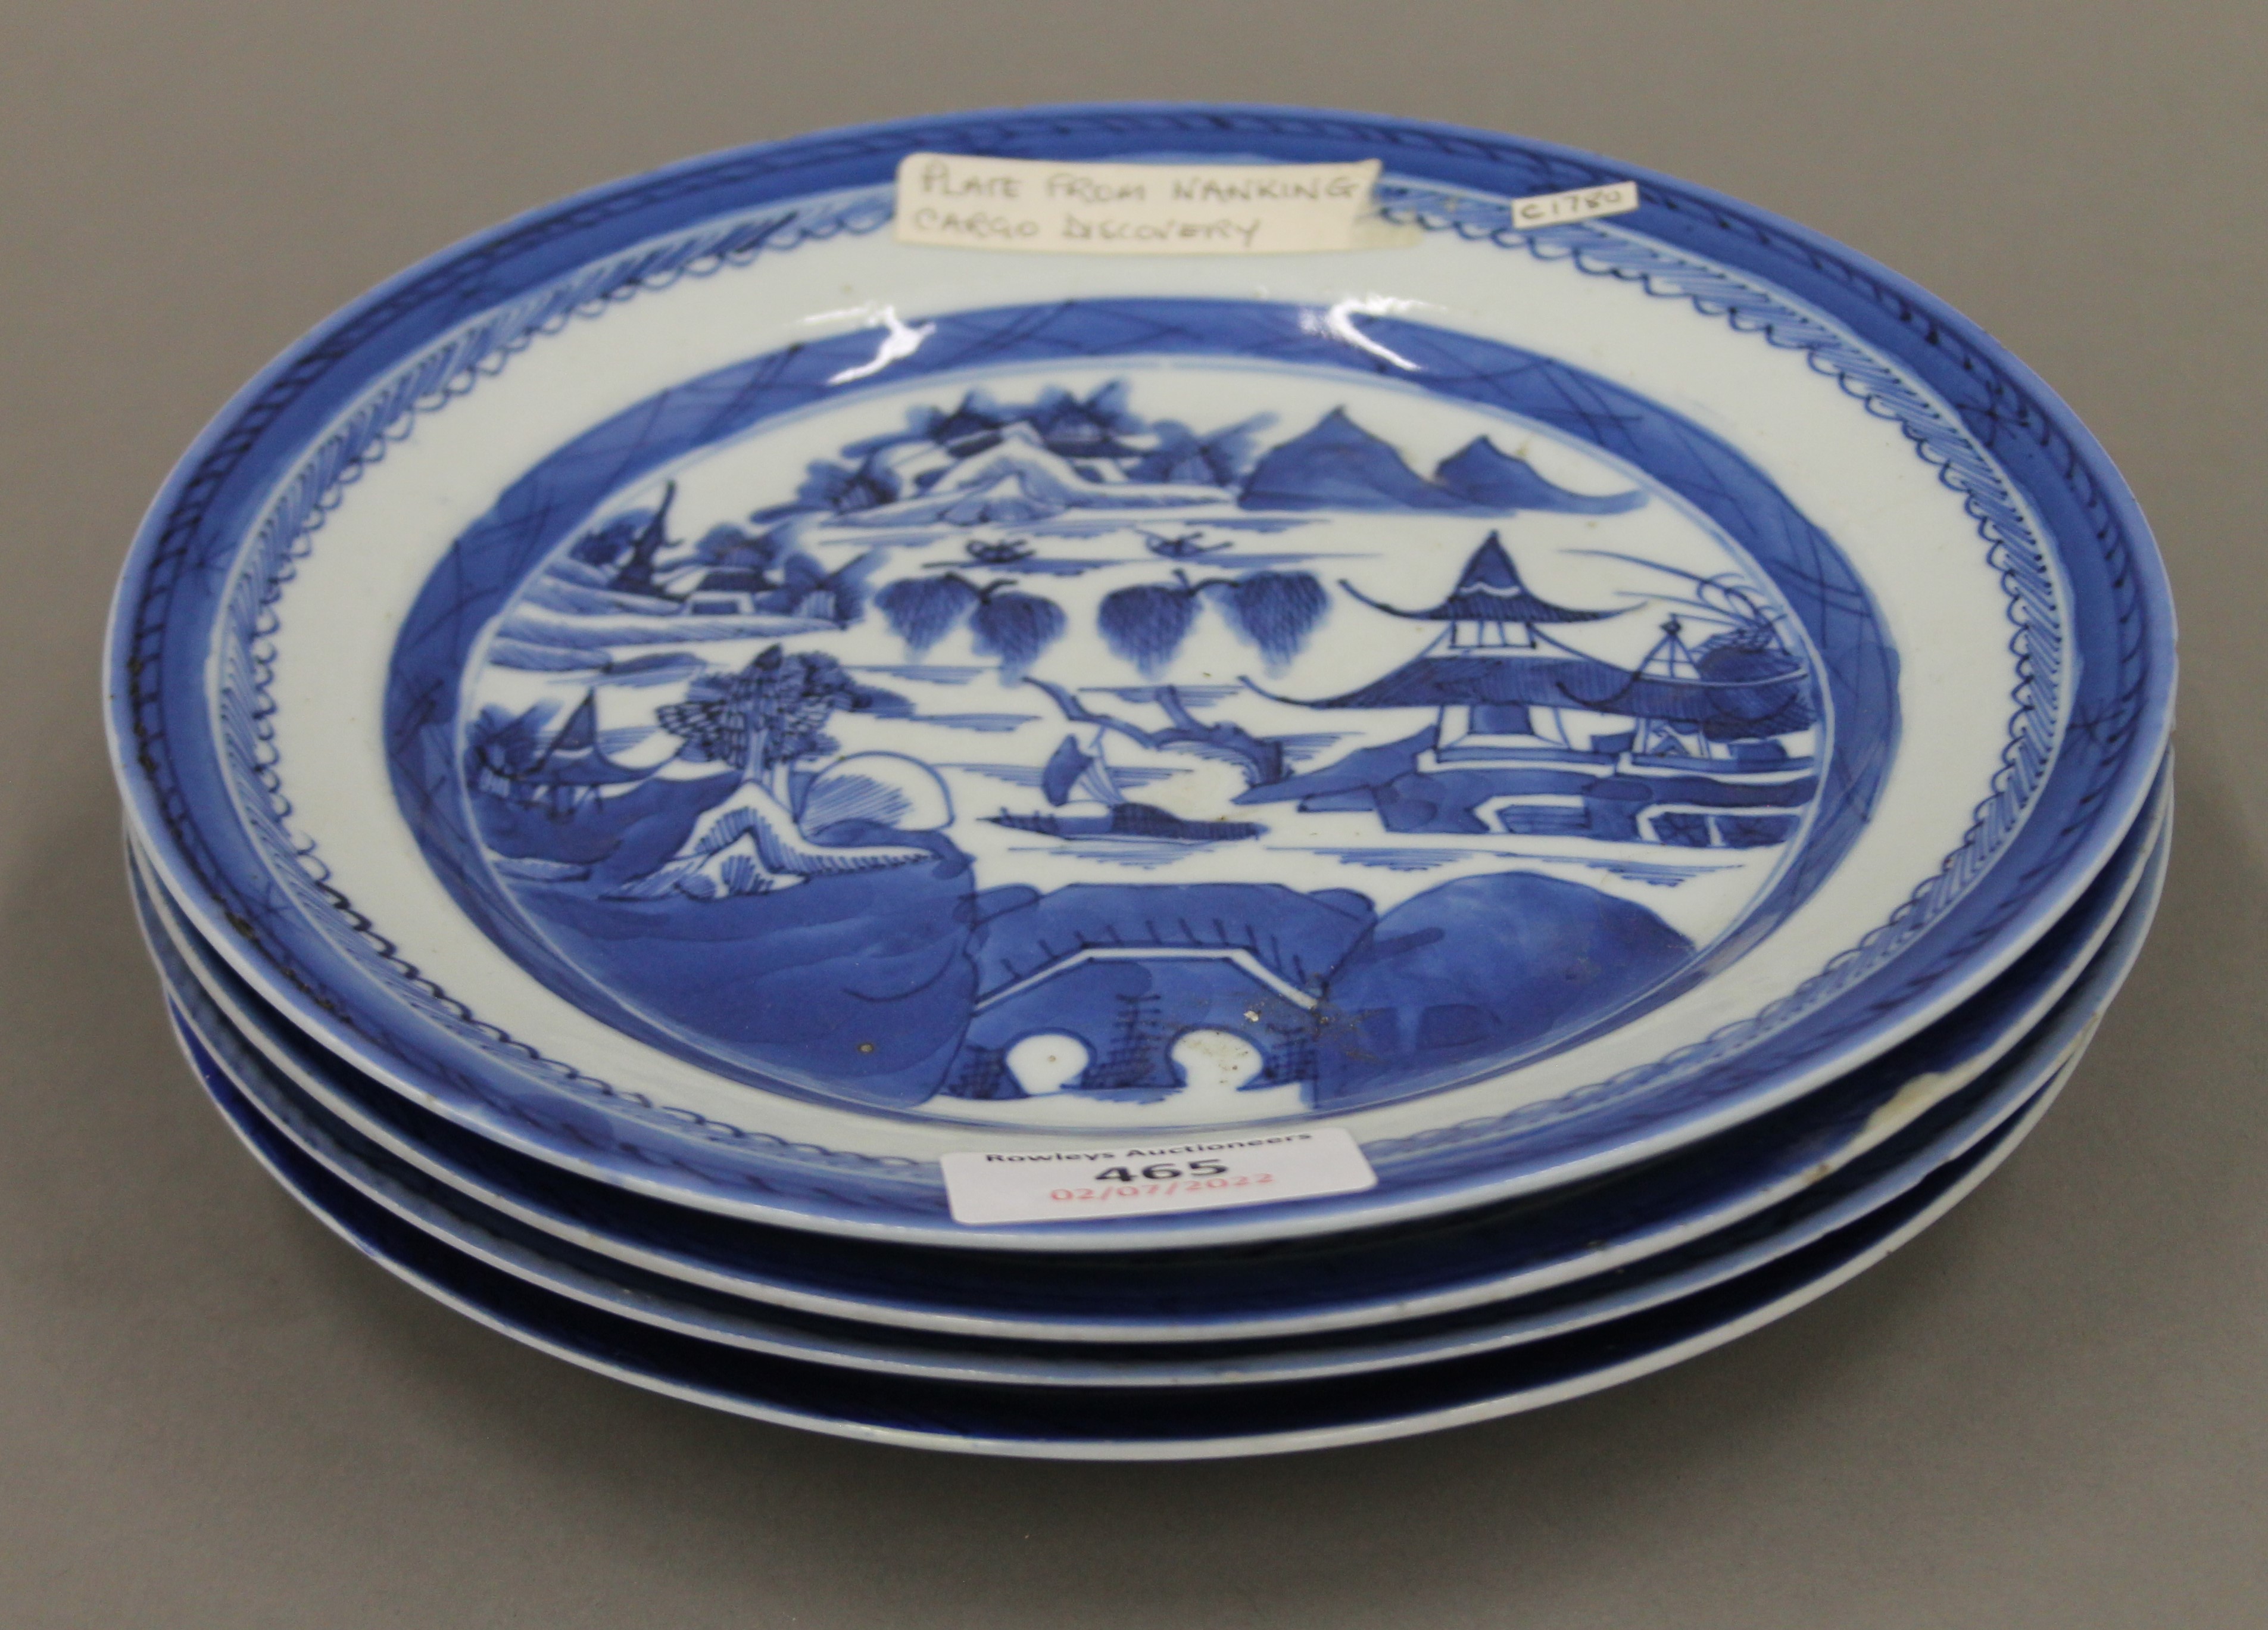 Four 18th century Chinese blue and white porcelain plates. Each approximately 21.5 cm diameter.